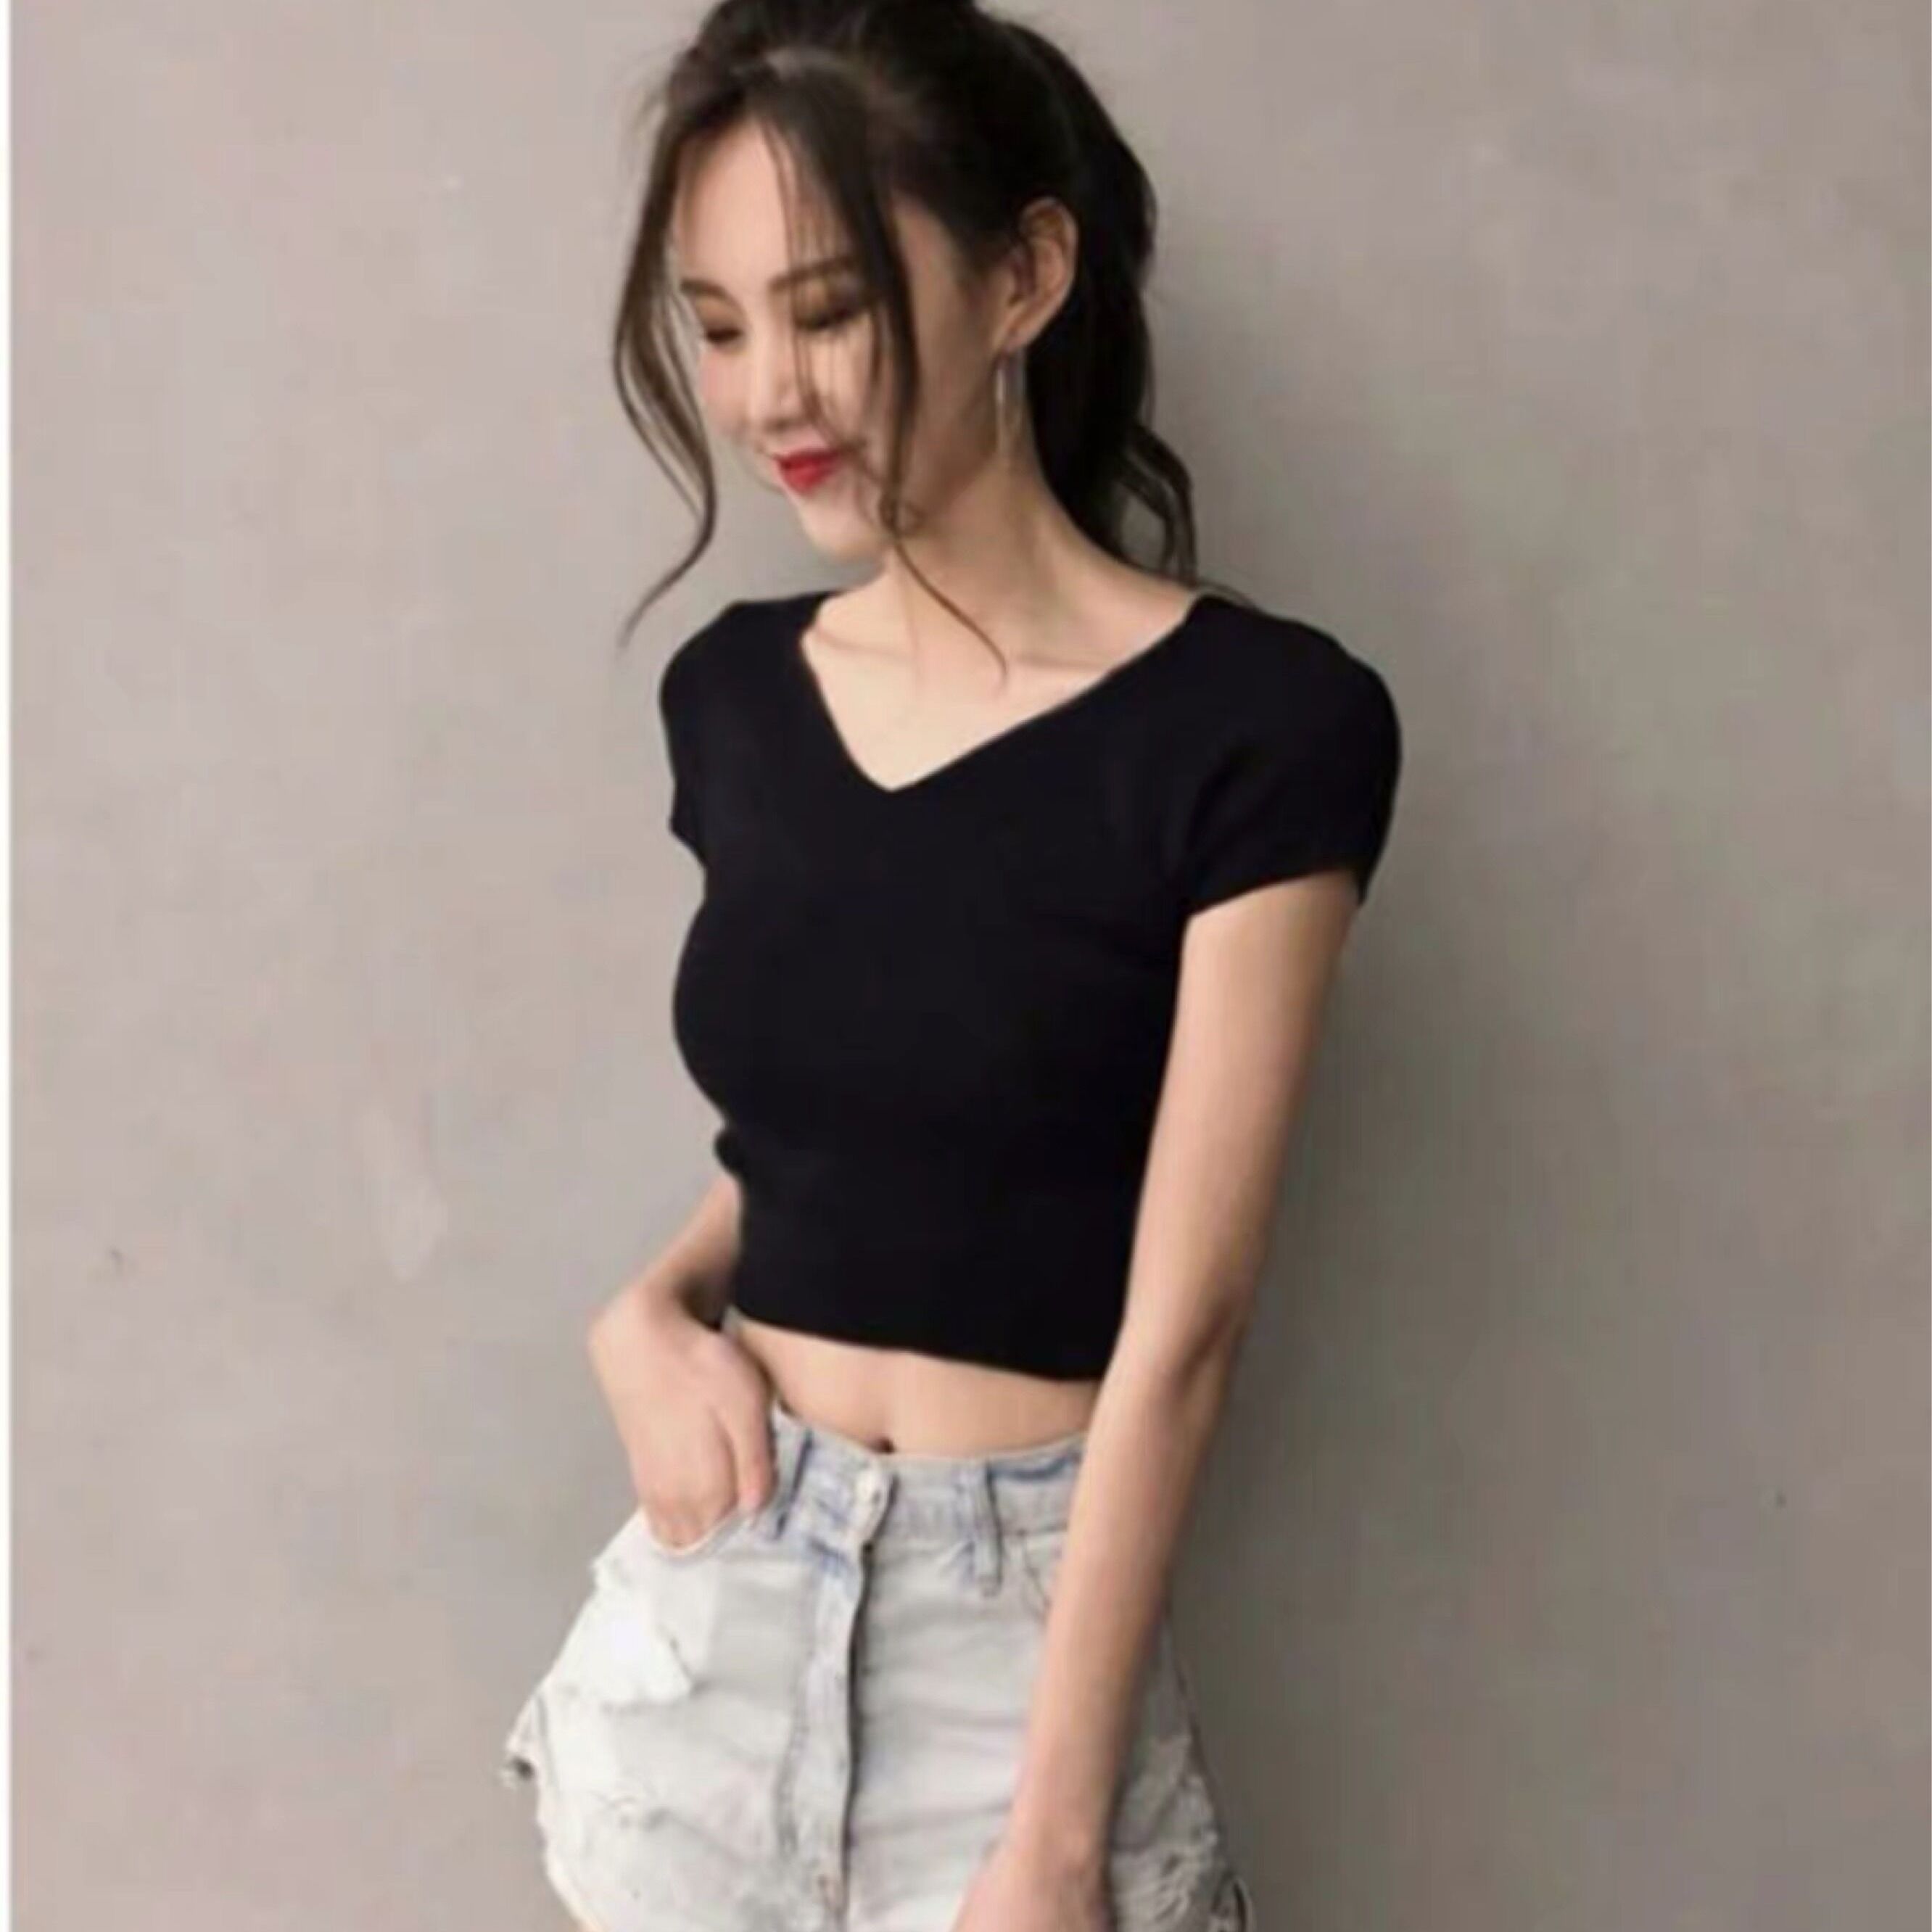 Double V-neck tight-fitting black short-sleeved female student high waist short t-shirt exposed navel top clothes leaking belly button sexy summer trend